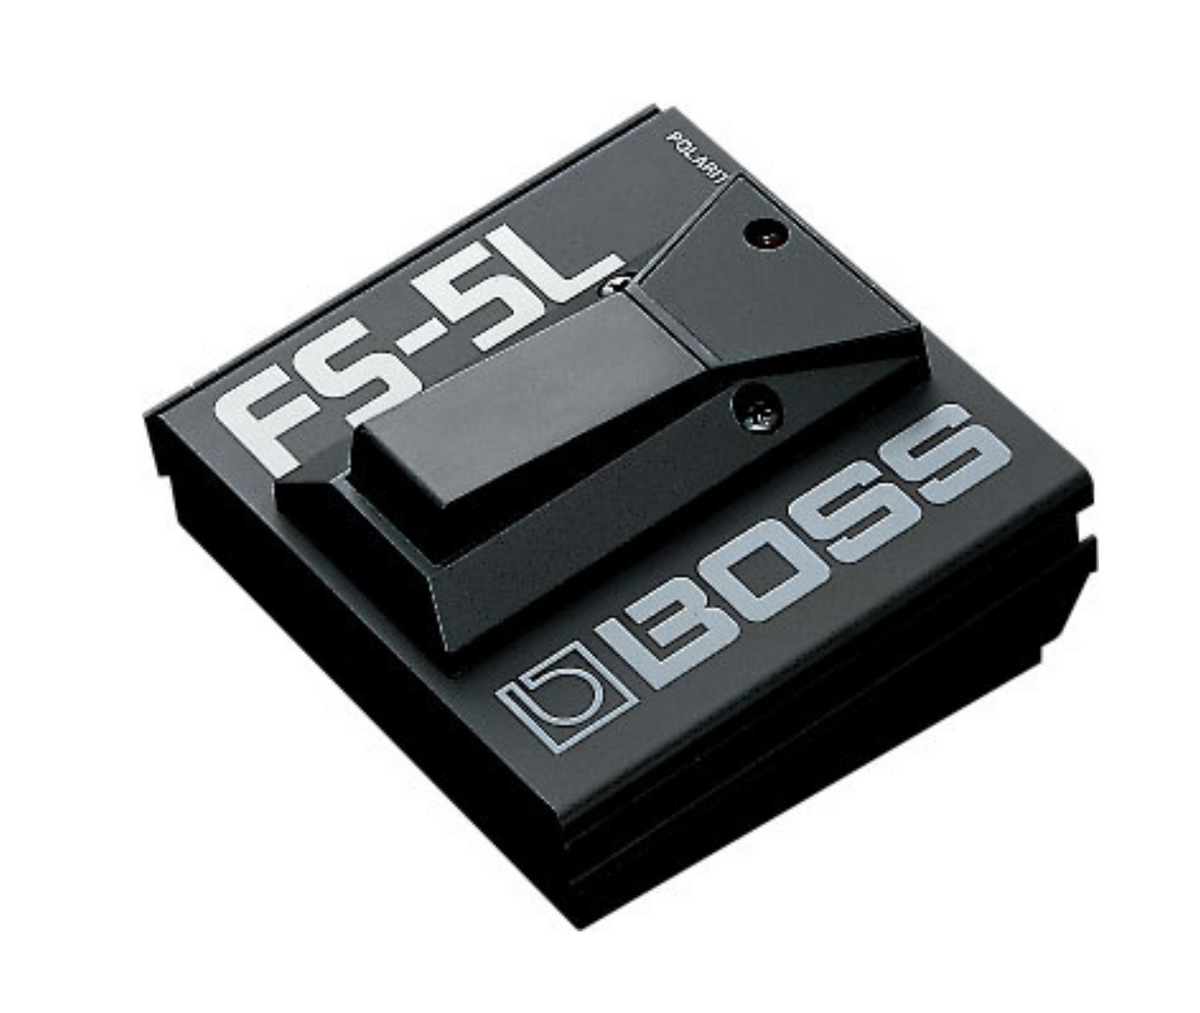 BOSS FS-5L Best Foot Switch Pedal Latch-type Footswitch with LED Status Indicator